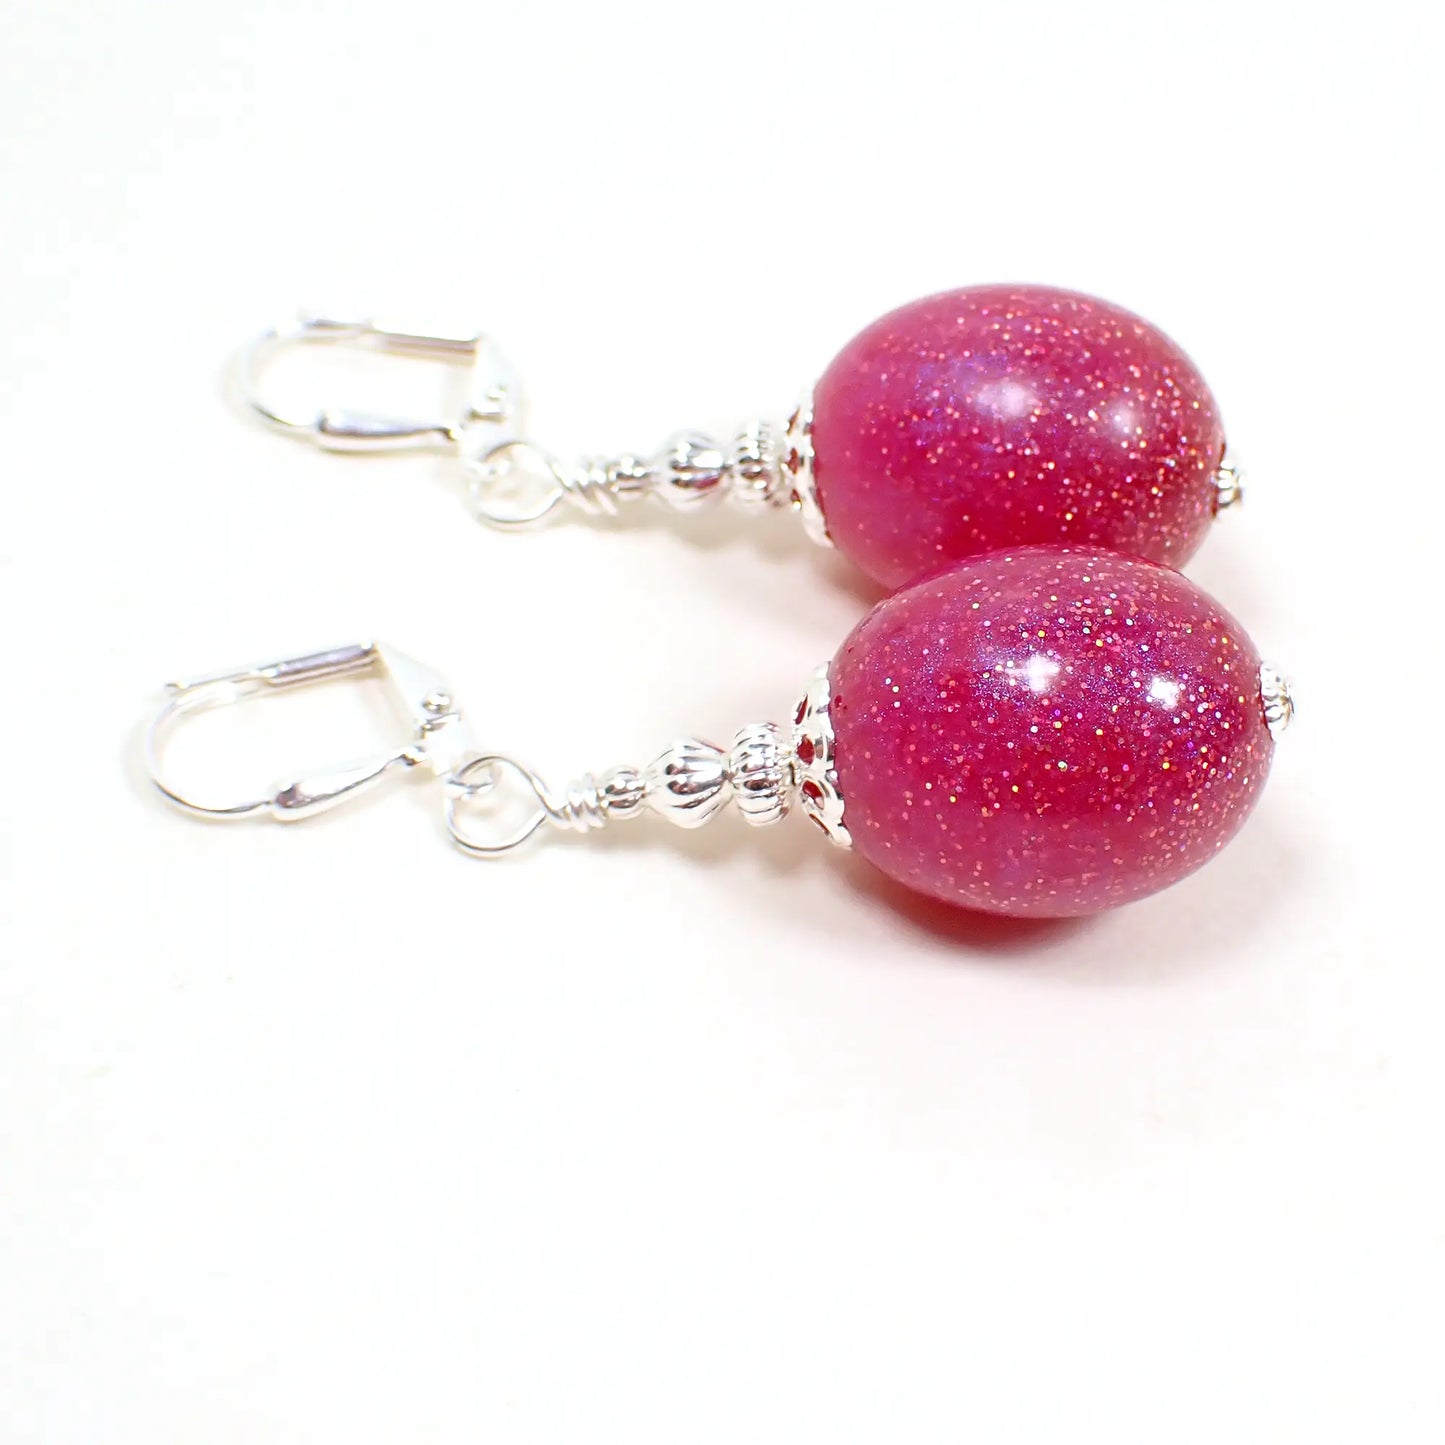 Handmade Pink Glitter Resin Oval Drop Earrings Silver Plated Hook Lever Back or Clip On